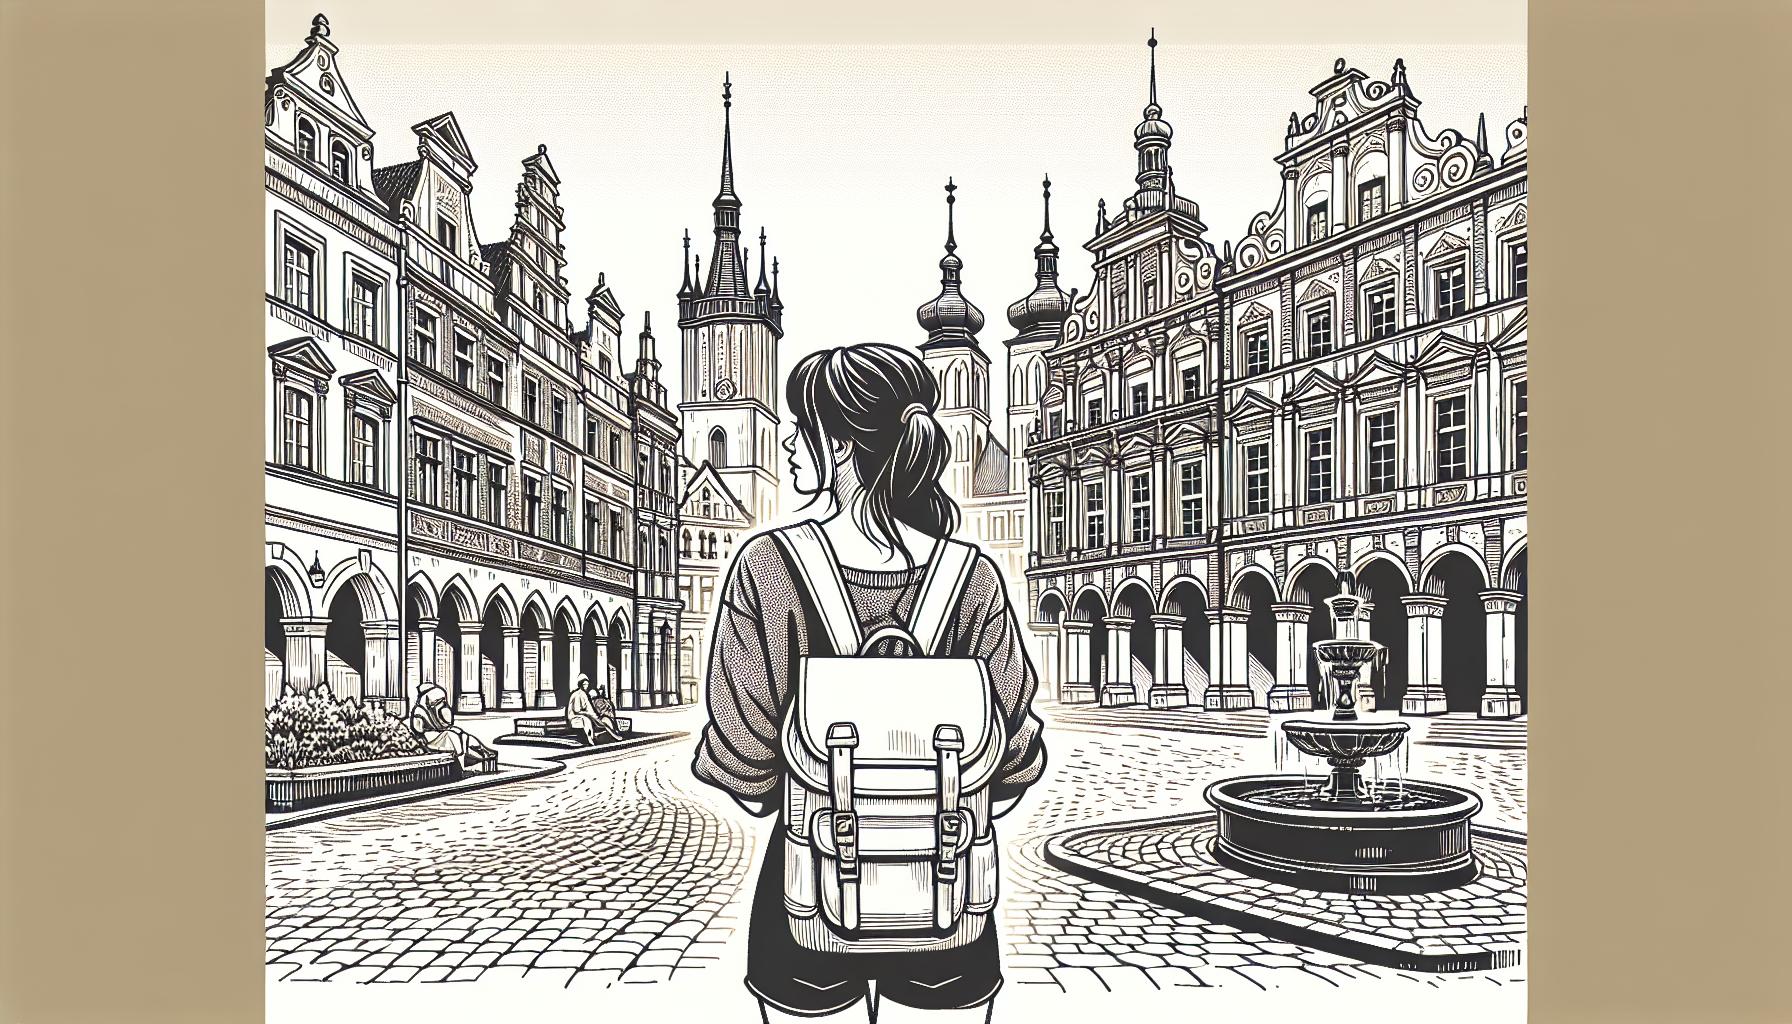 Destinations 5 Best European Cities for Solo Travel ReallyRemoteWorker Embark on a journey of self-discovery with solo travel to Europe's top cities. This article uncovers the pleasures of solo travel, highlighting personal growth, freedom, and the thrill of customizing your own adventure. Find your courage, gain confidence and explore independently.